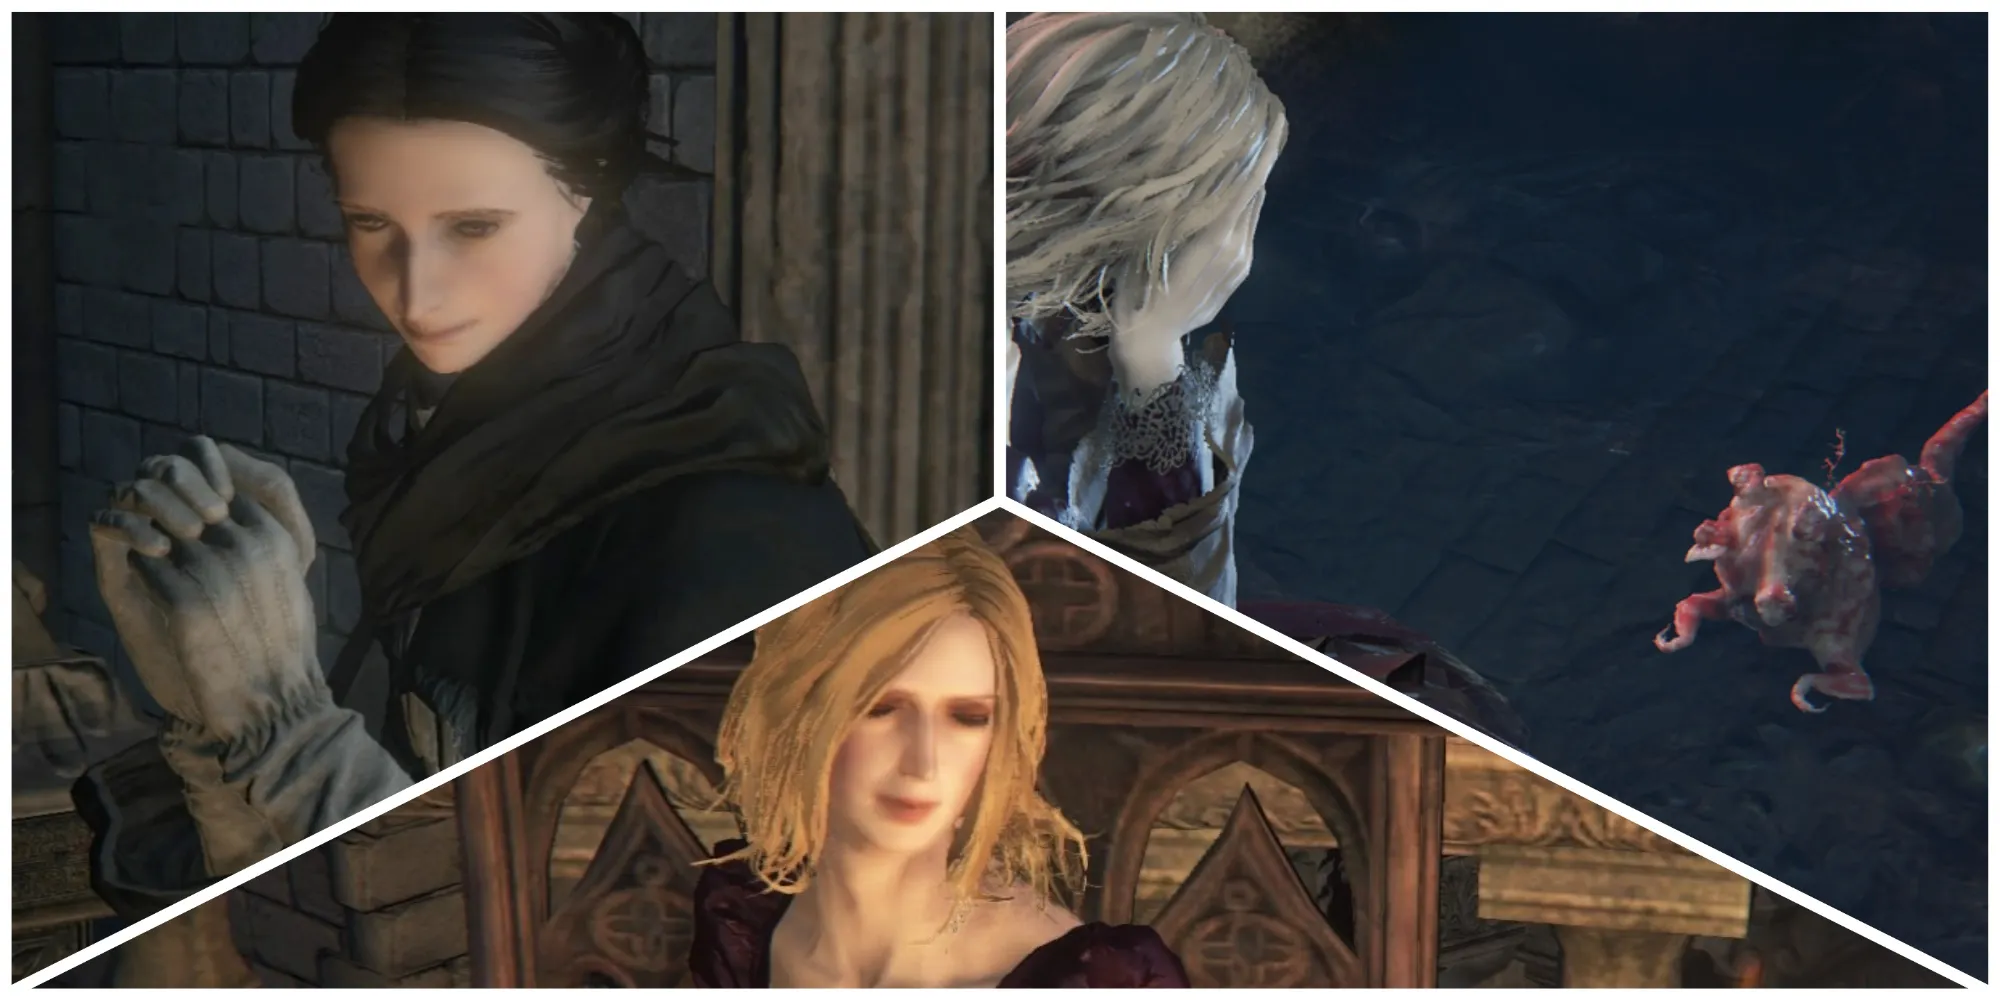 Arianna, Sister Adella and The Celestial Child in Bloodborne